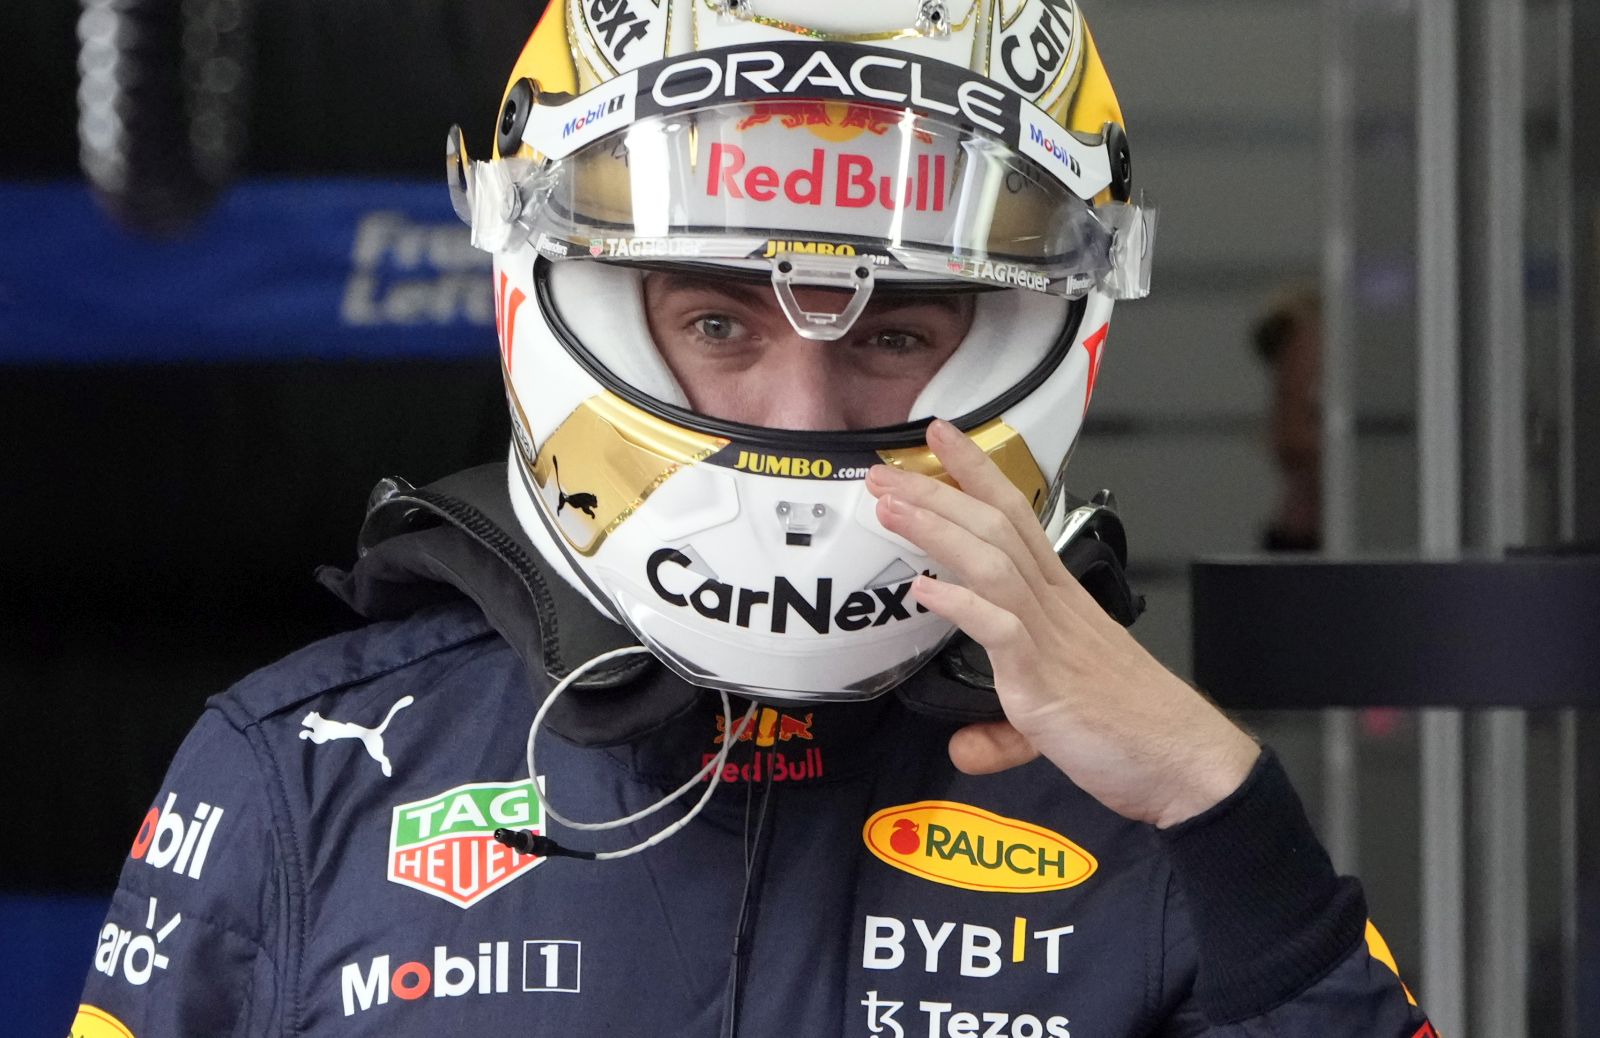 epa10228538 Dutch Formula One driver Max Verstappen of Red Bull Racing prepares ahead of the first practice session of the Japanese Formula One Grand Prix in Suzuka, Japan, 07 October 2022. The Japanese Formula One Grand Prix will take place on 09 October 2022.  EPA/FRANCK ROBICHON